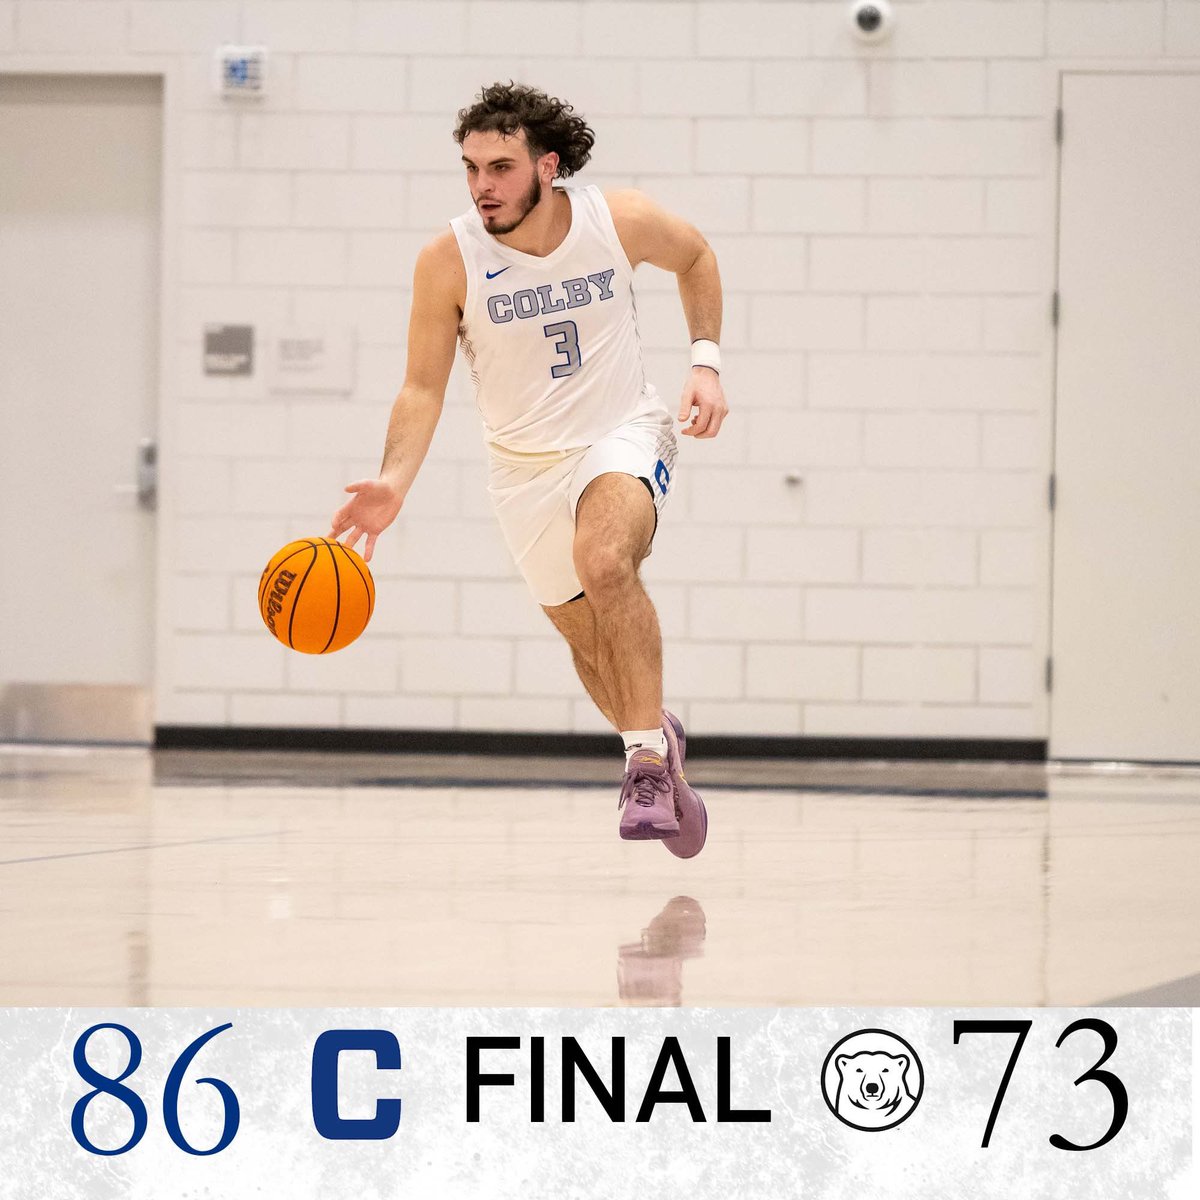 Mules take down the Polar Bears! Montiel leads the way with 21 points. Max Poulton, Liam O’Connell and Sam Hinman each in double figures.